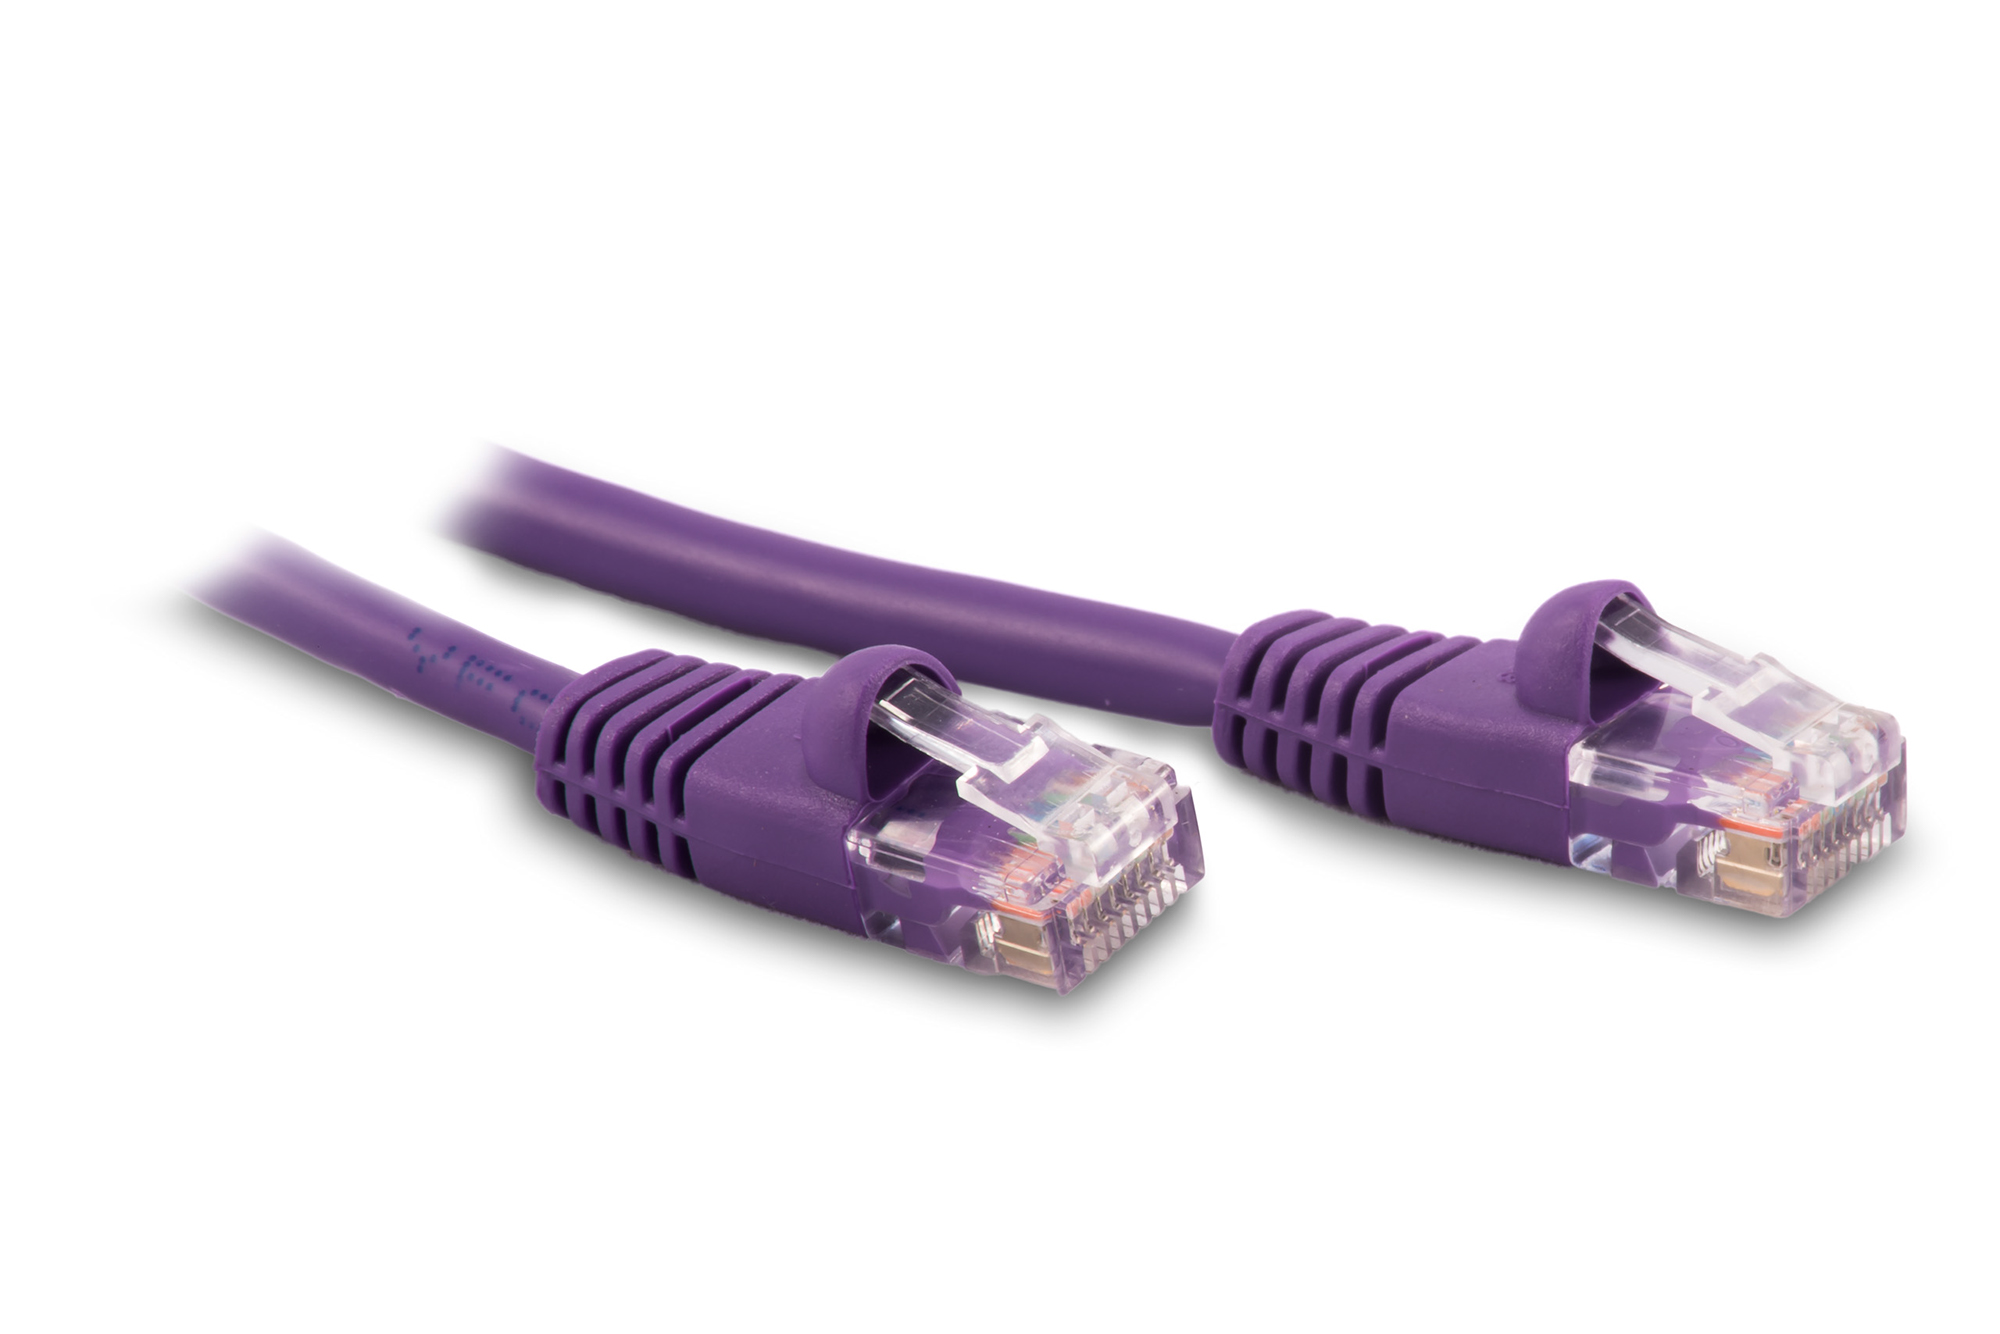 100ft Cat6 Ethernet Patch Cable - Violet Color - Snagless Boot